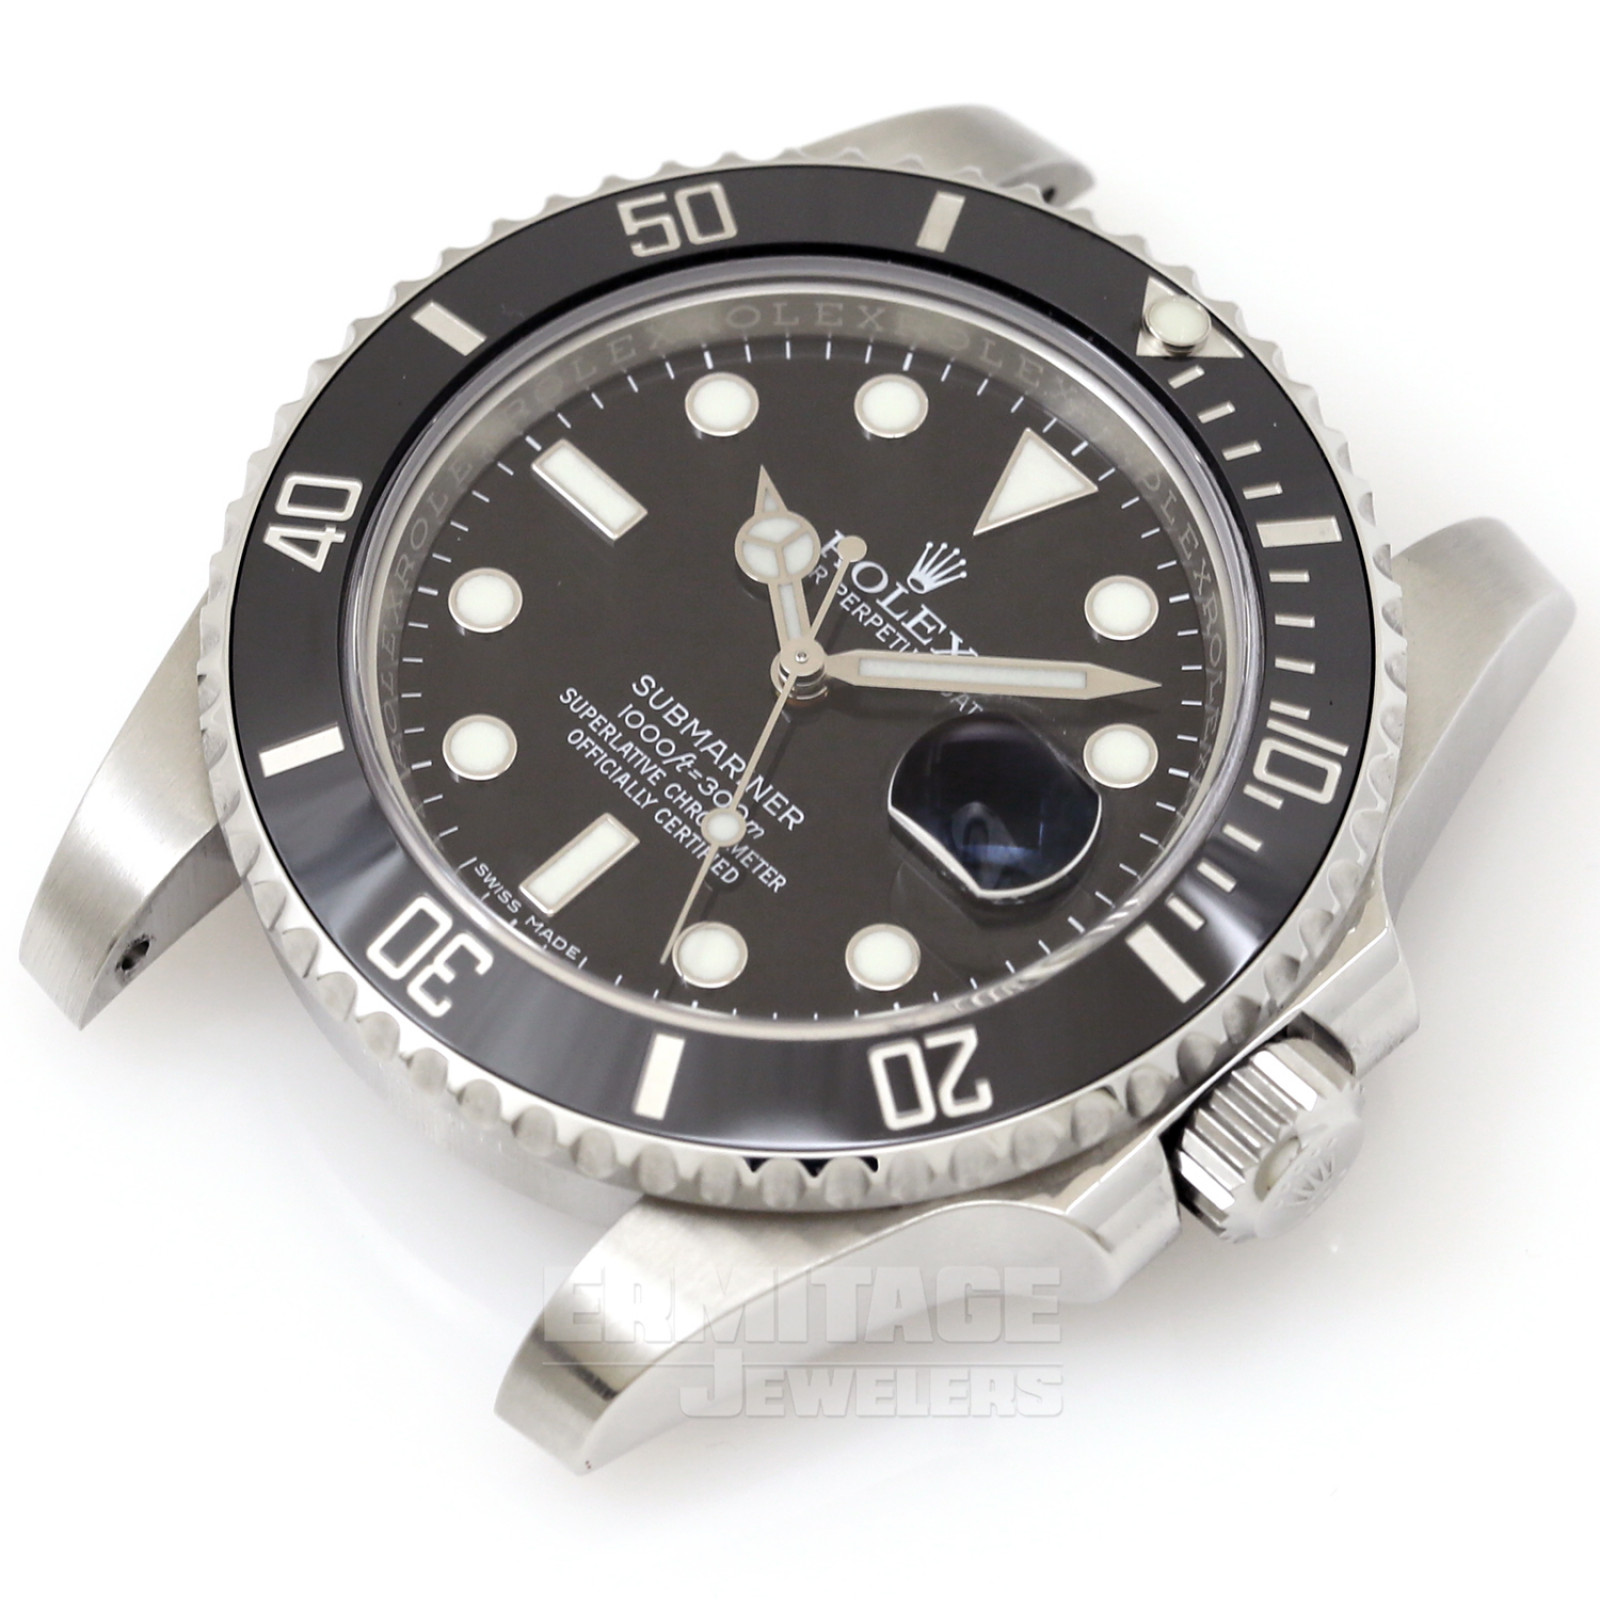 40 mm Rolex Submariner 116610 Steel on Oyster with Black Dial